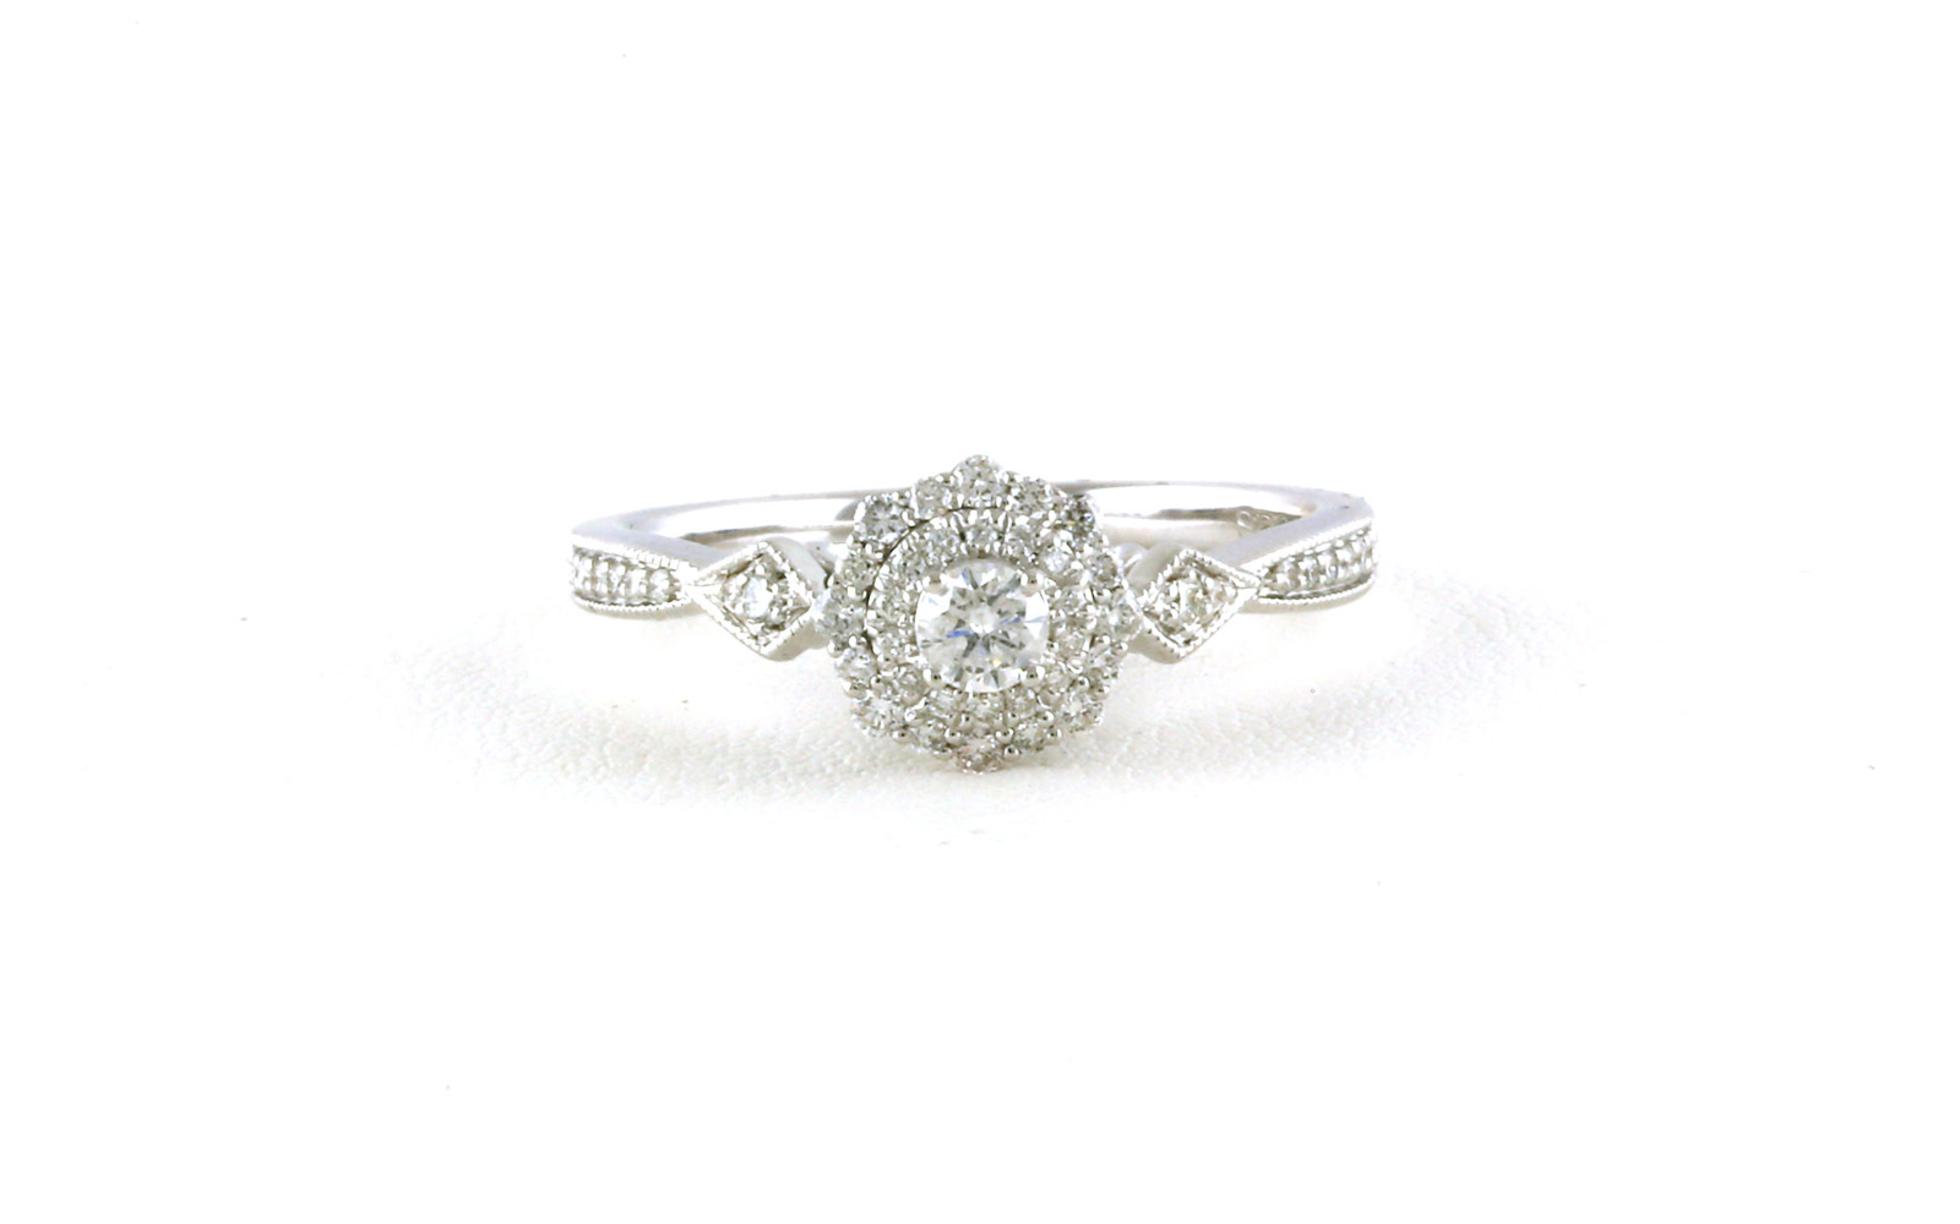 Vintage Double Halo-style Diamond Ring with Milgrain Detail in White Gold (0.38cts TWT)